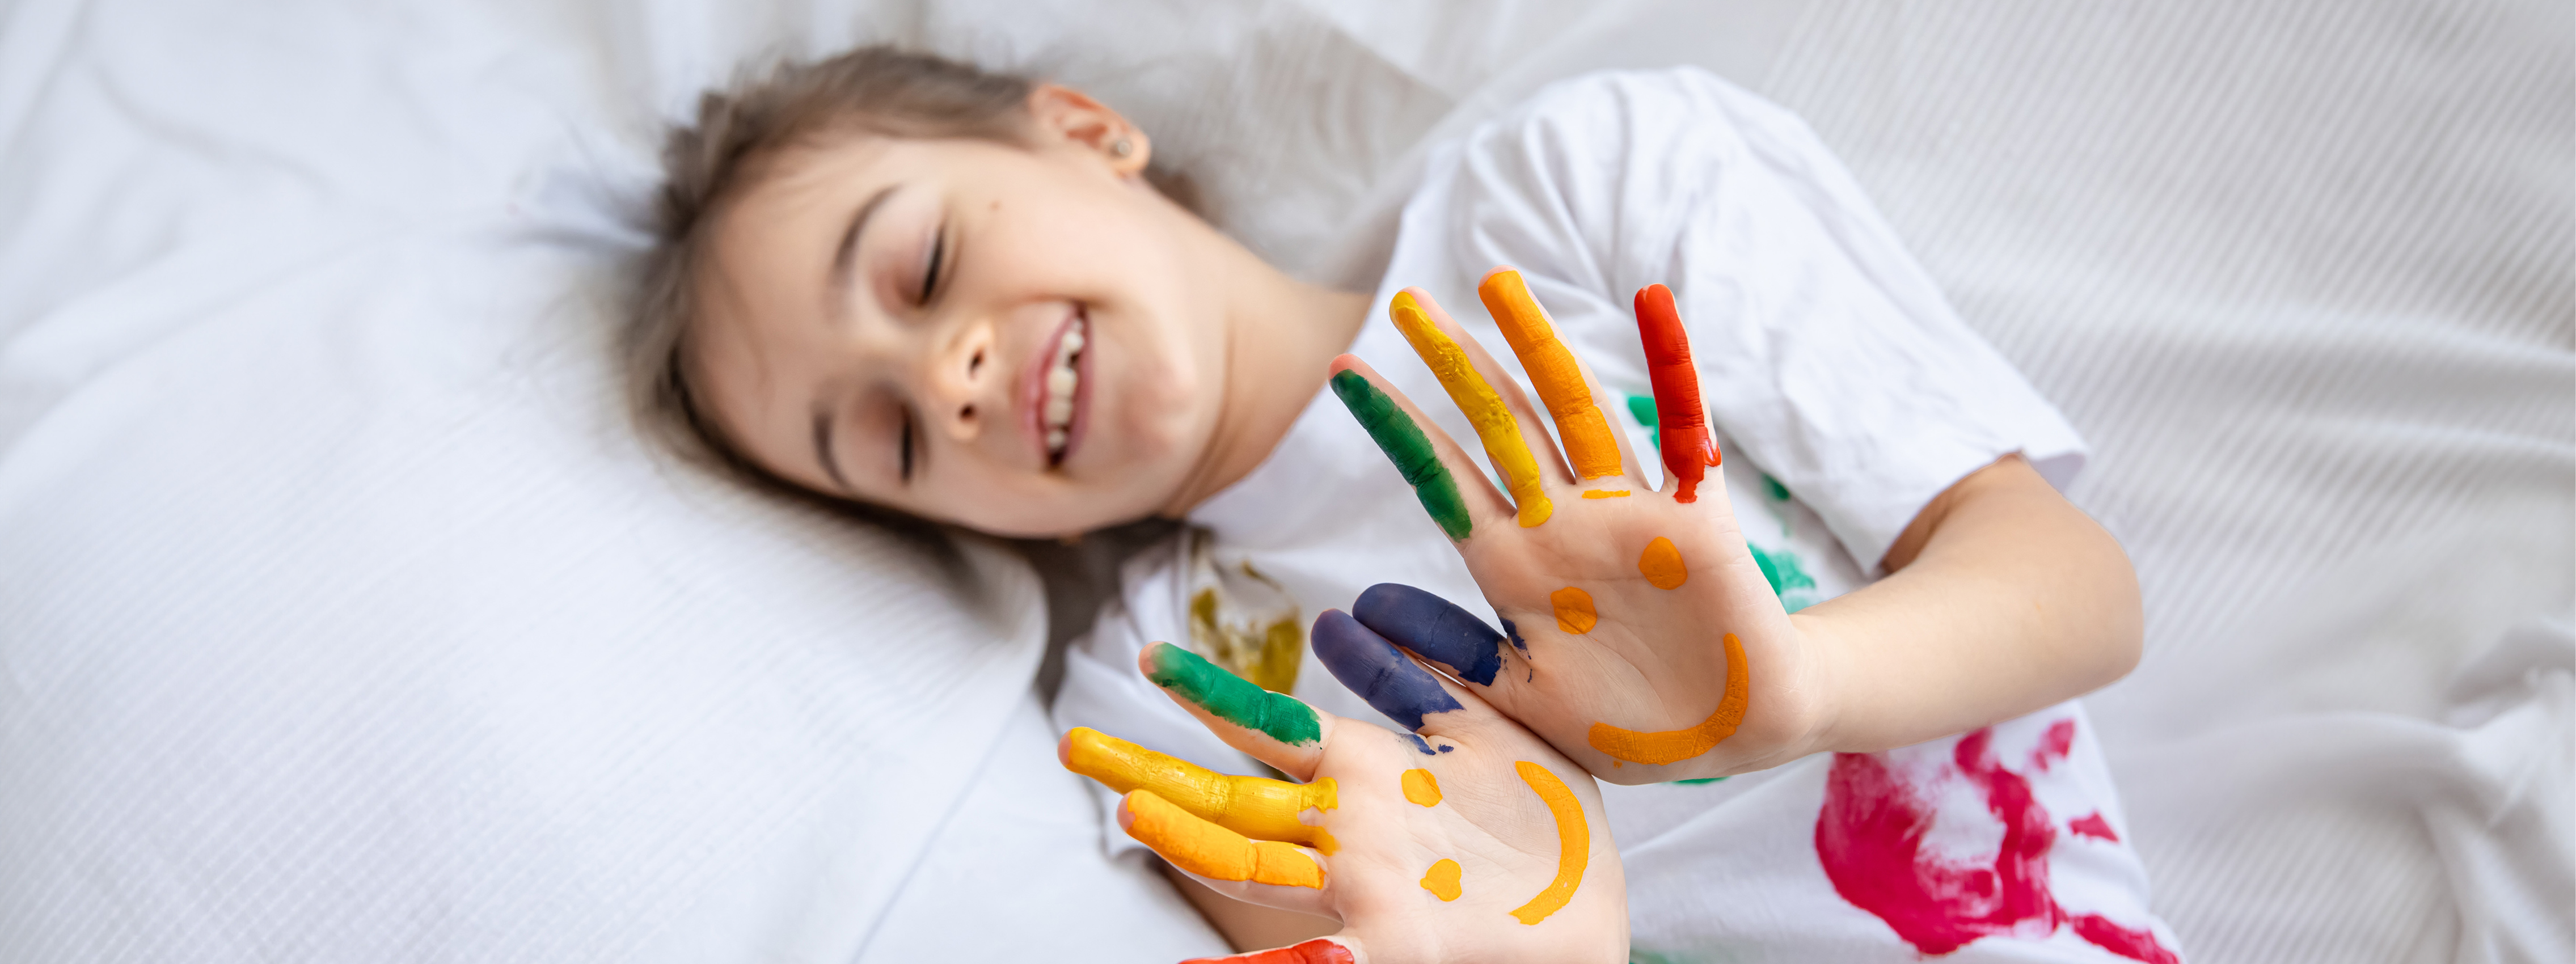 Sensory products for young children on the autism spectrum